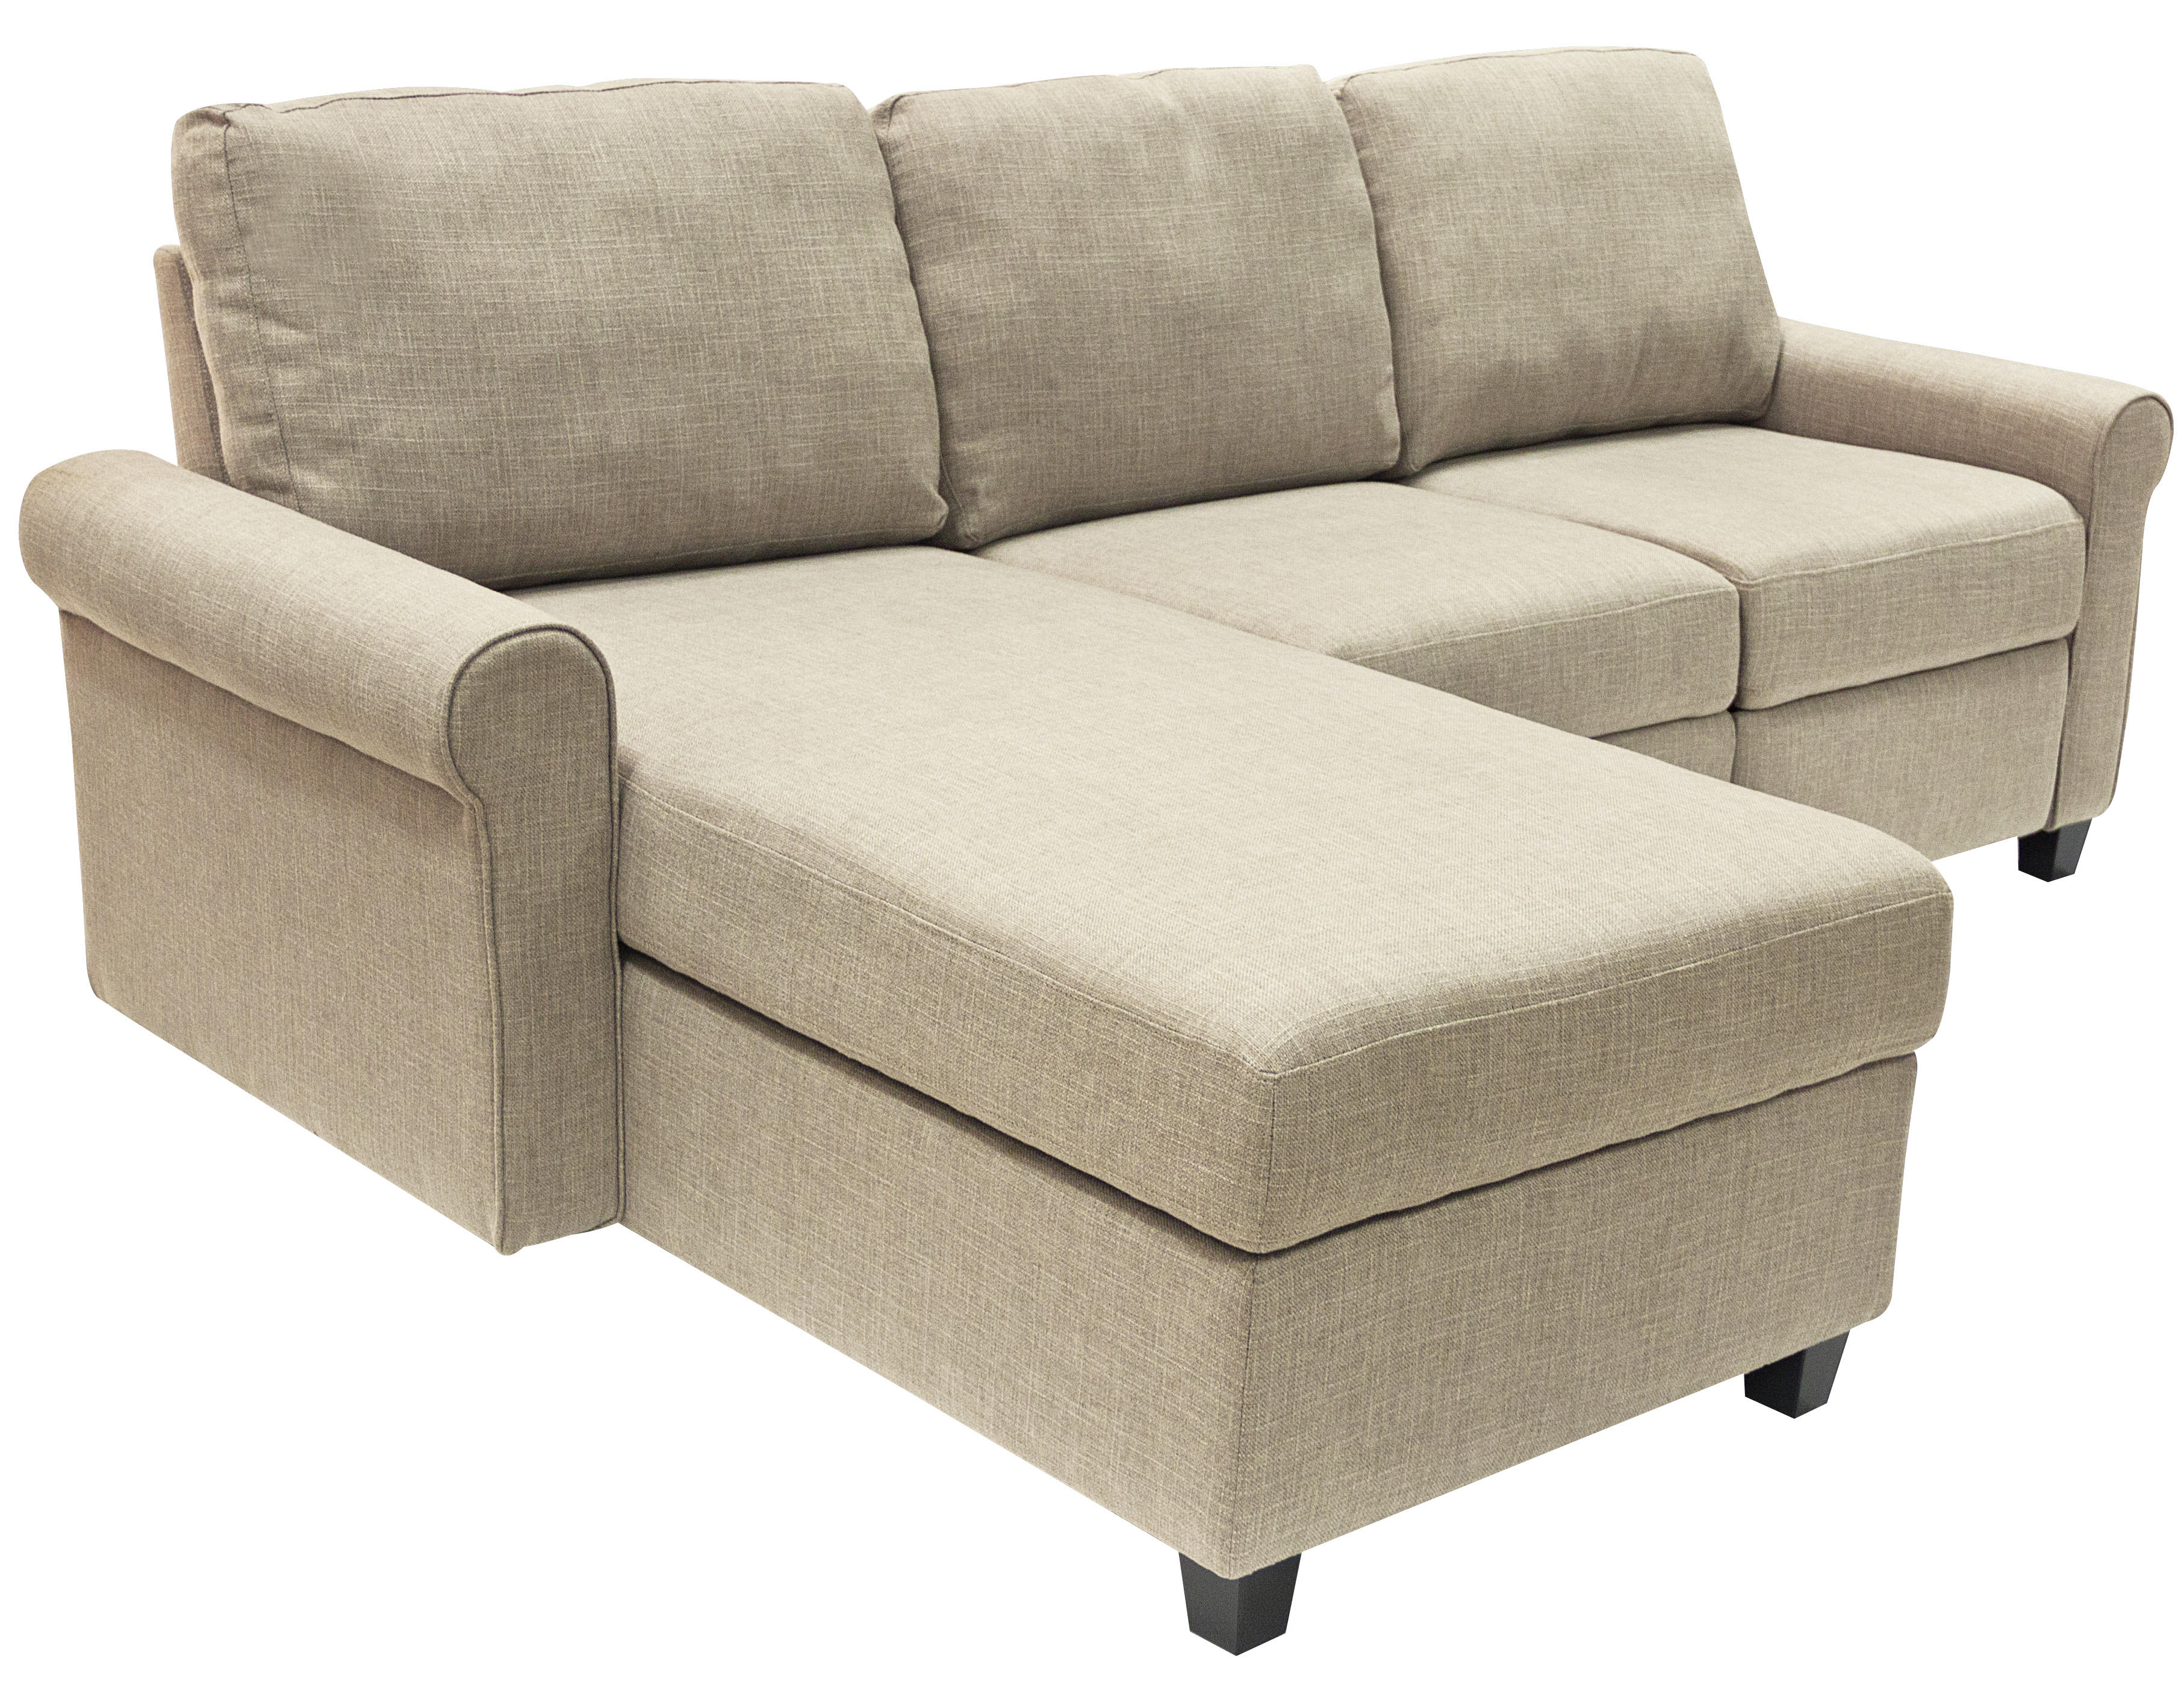 Serta Copenhagen Reclining Sectional with Left Storage Chaise - Oatmeal - image 5 of 9